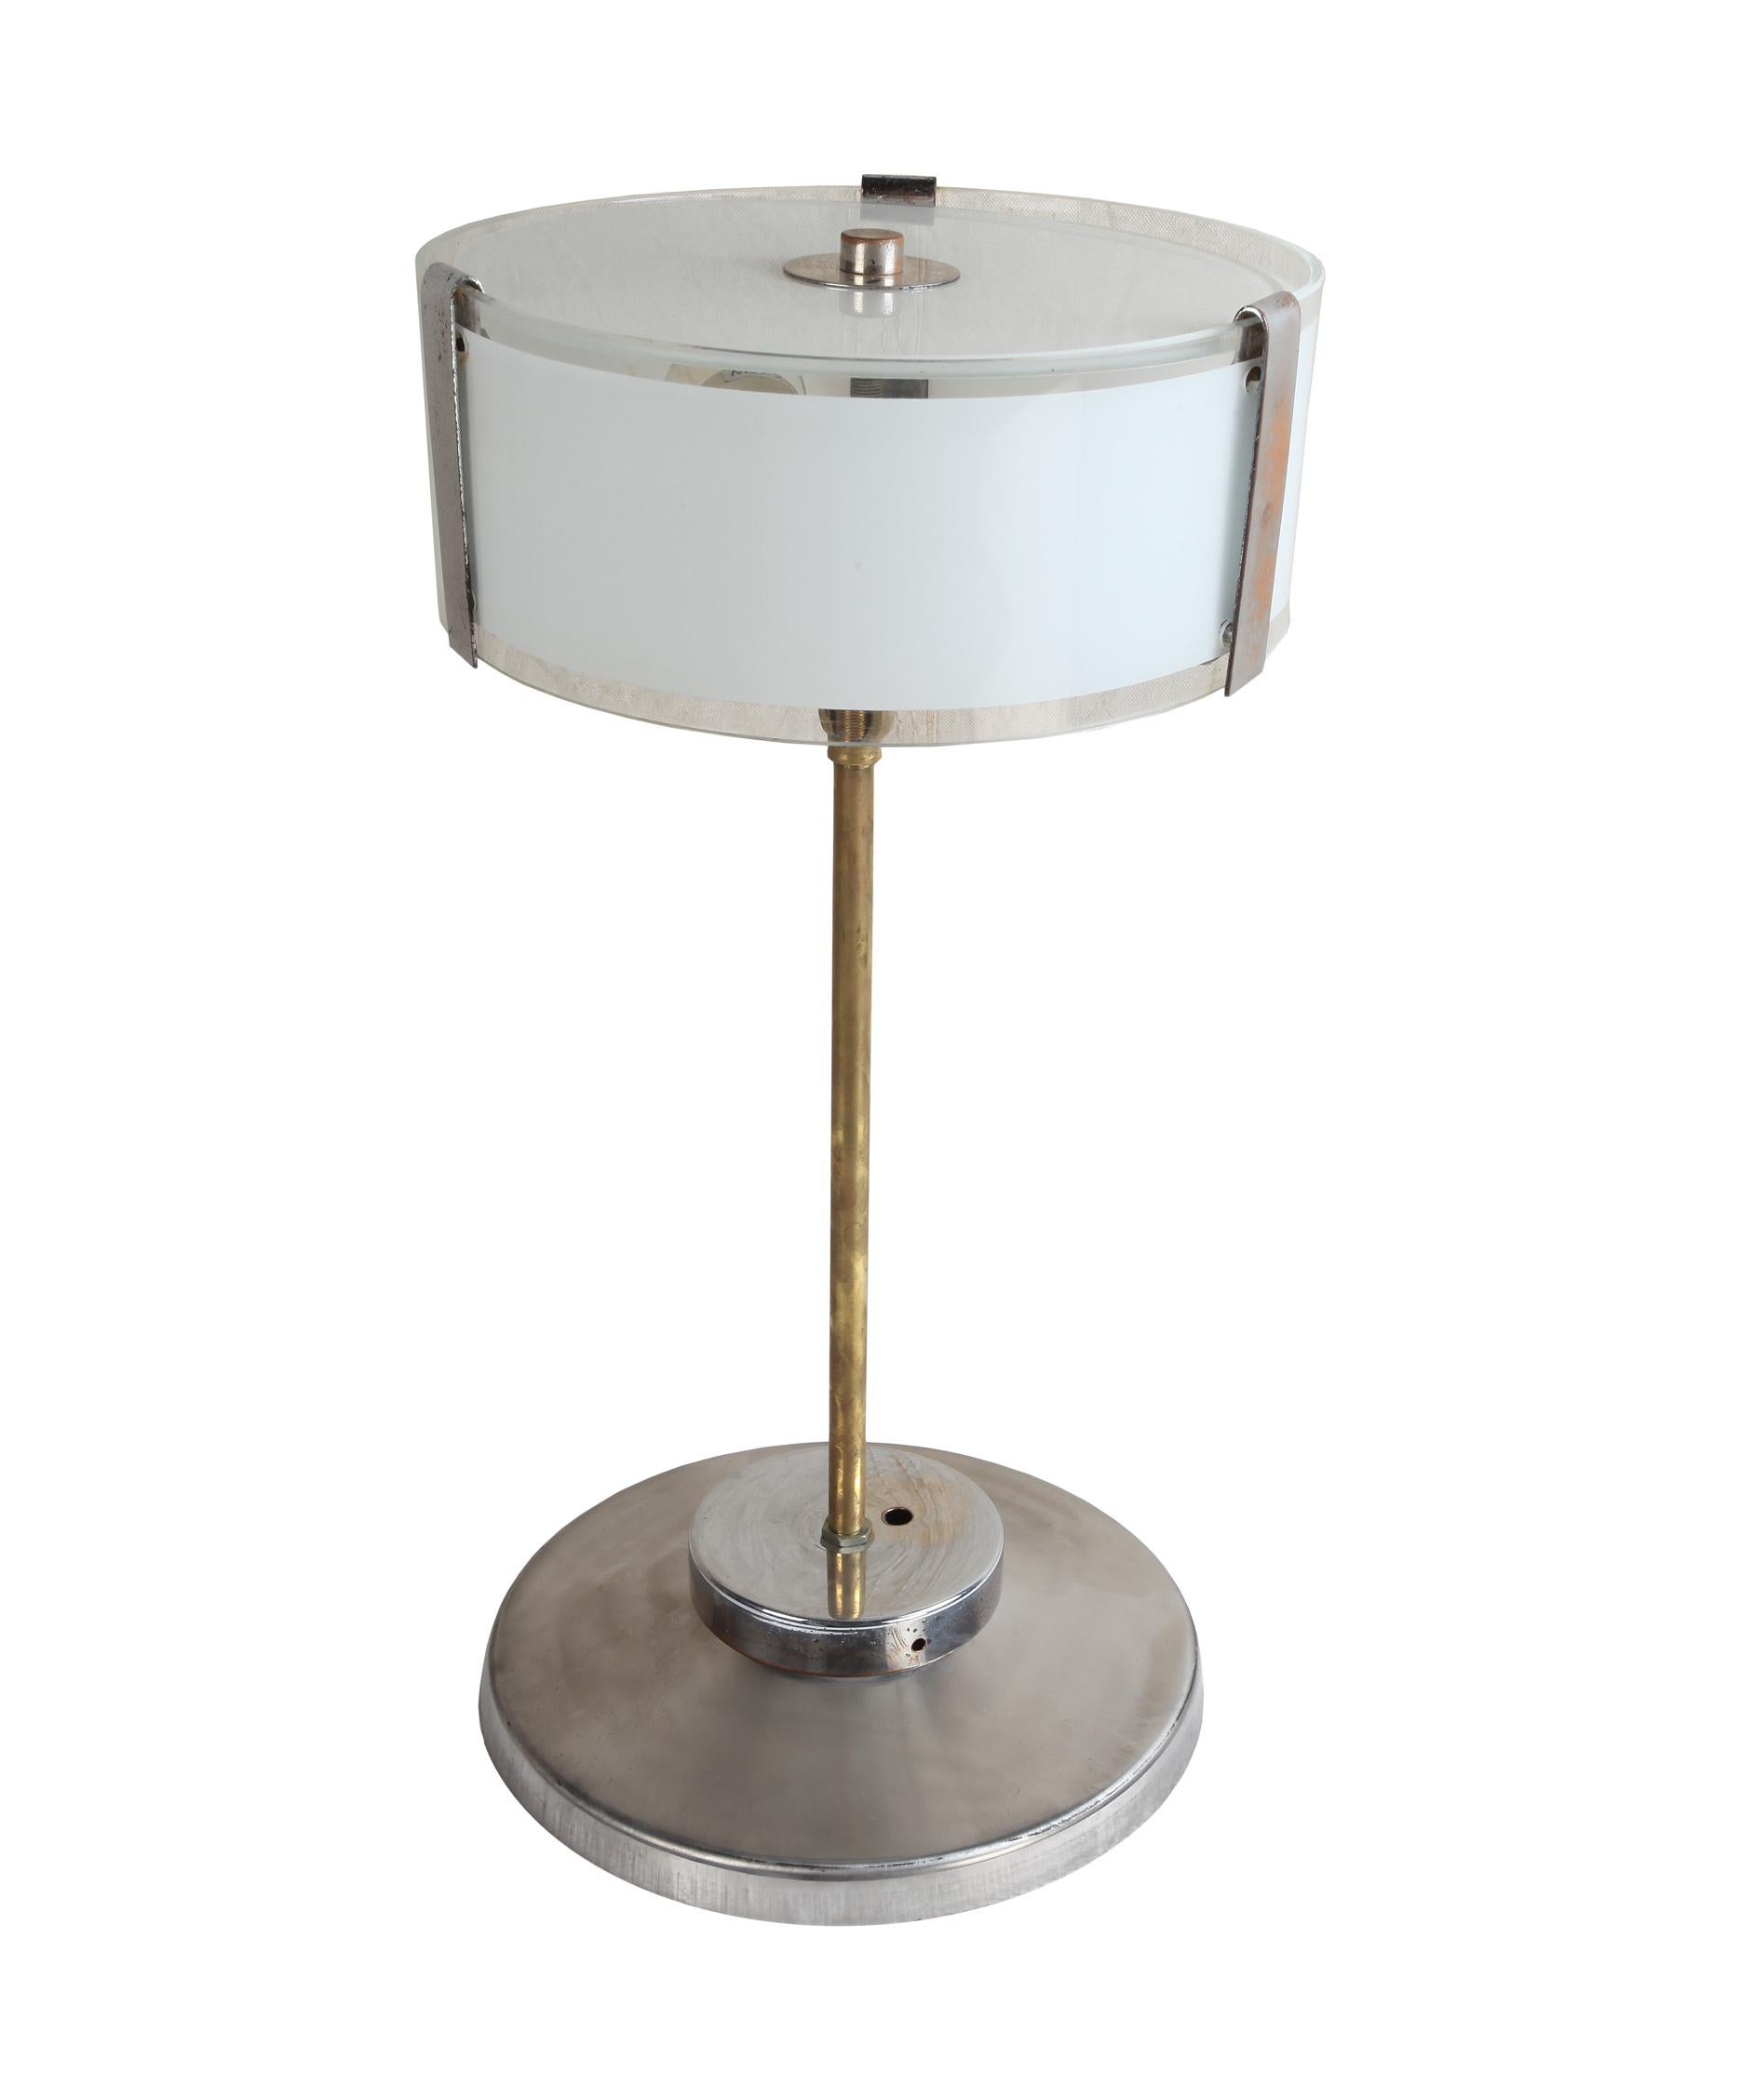 Pair of chrome Mid-Century Modern table lamps with frosted glass shade. Brass stem. Each lamp has two standard size light sockets and rewired for American use. European. These could actually look great as pendants, see the last photo. Just the shade